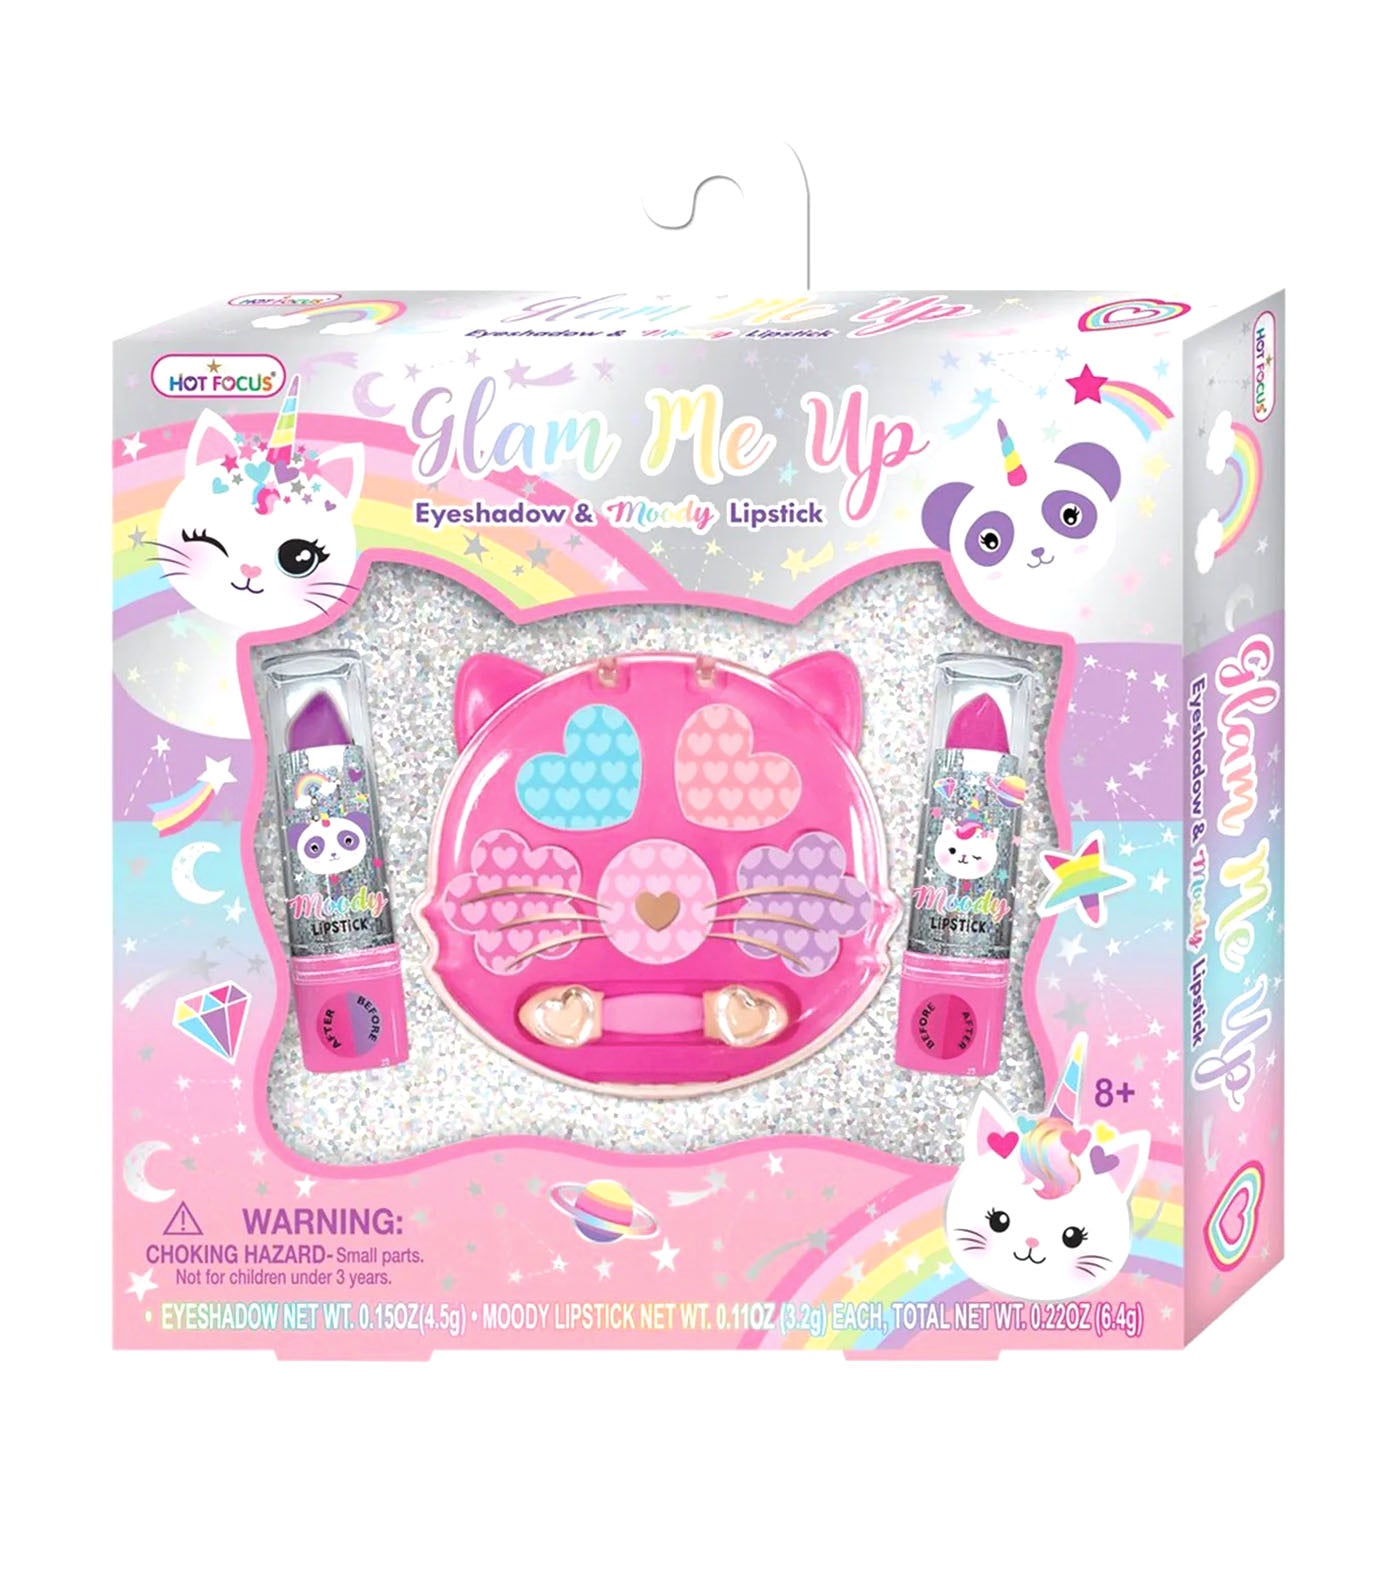 Glam Me Up Caticorn